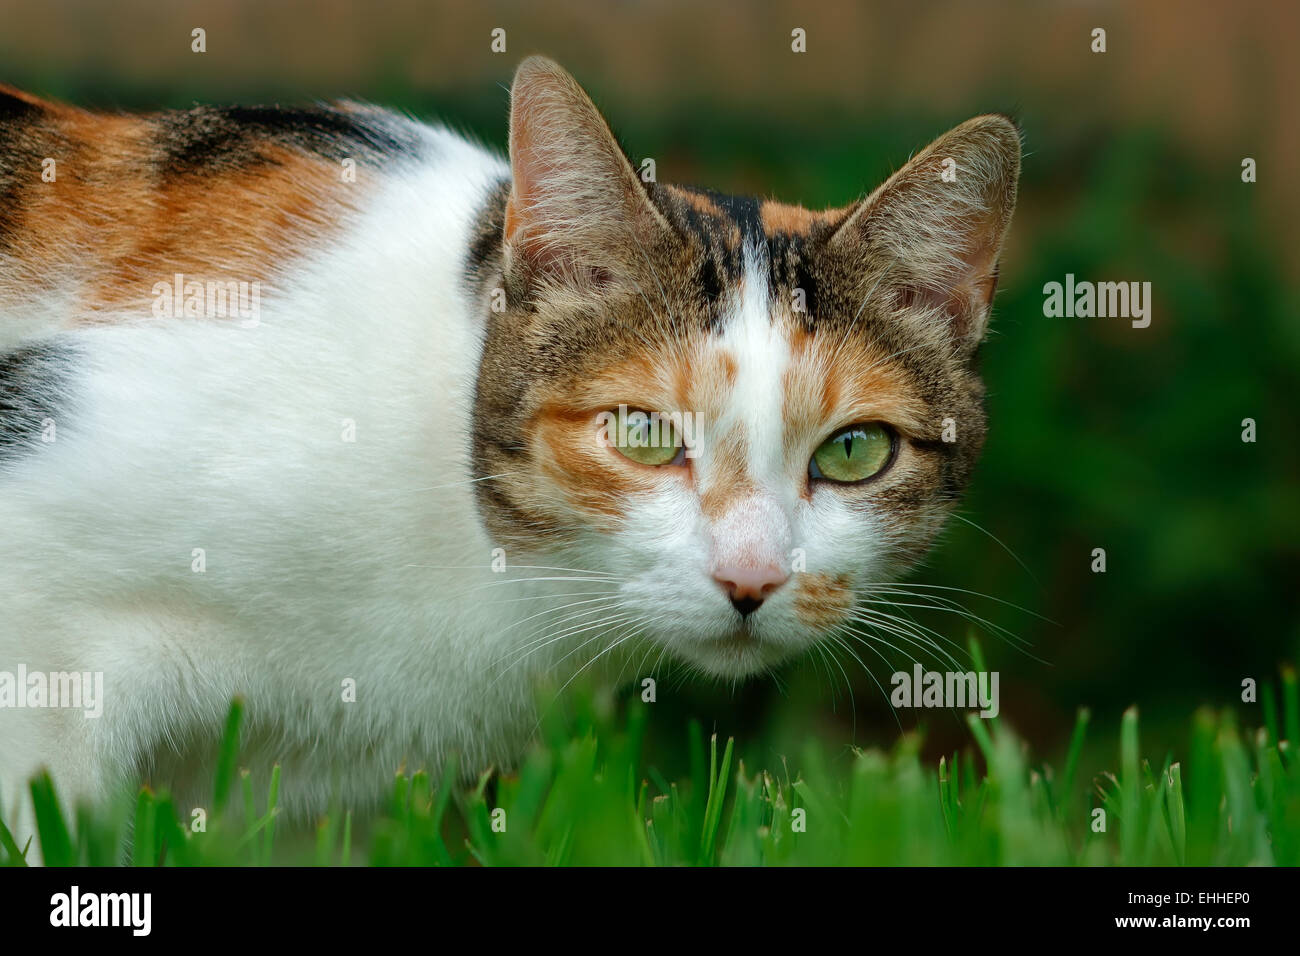 Portrait of an adorable cat in garden on grass Stock Photo